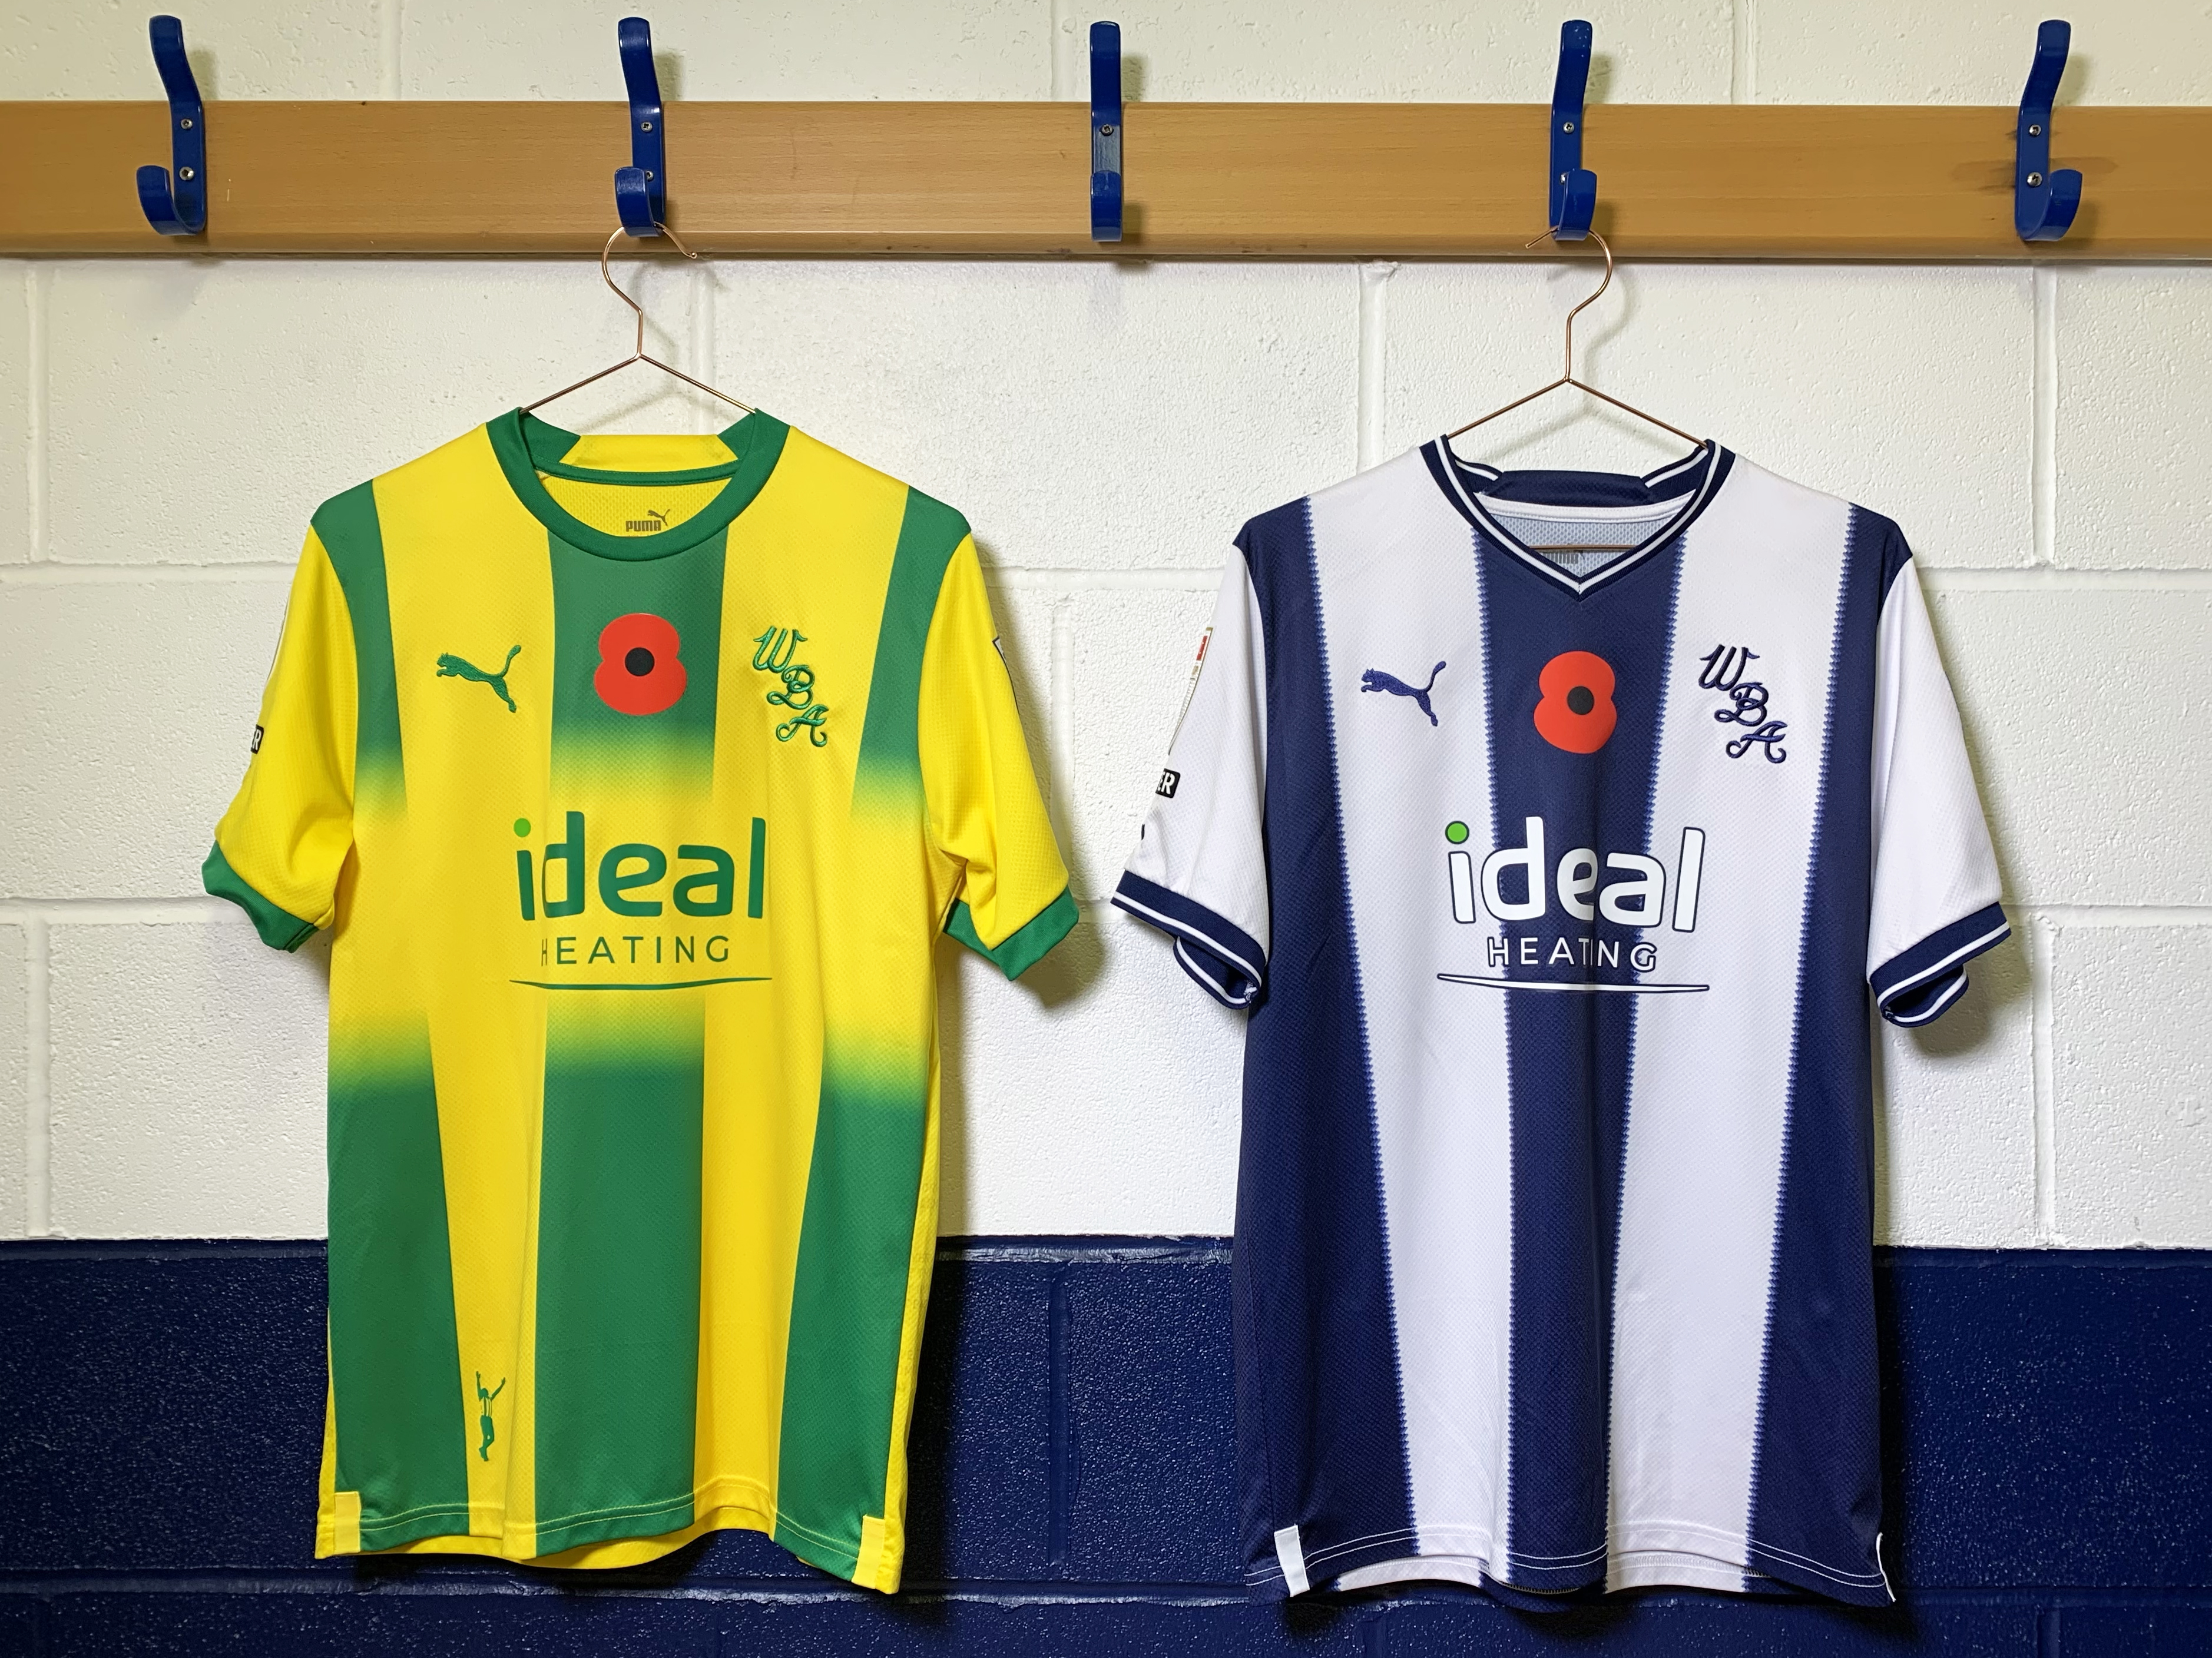 An image of Albion's home (blue and white) and away (yellow and green) shirts hung up with poppies on them